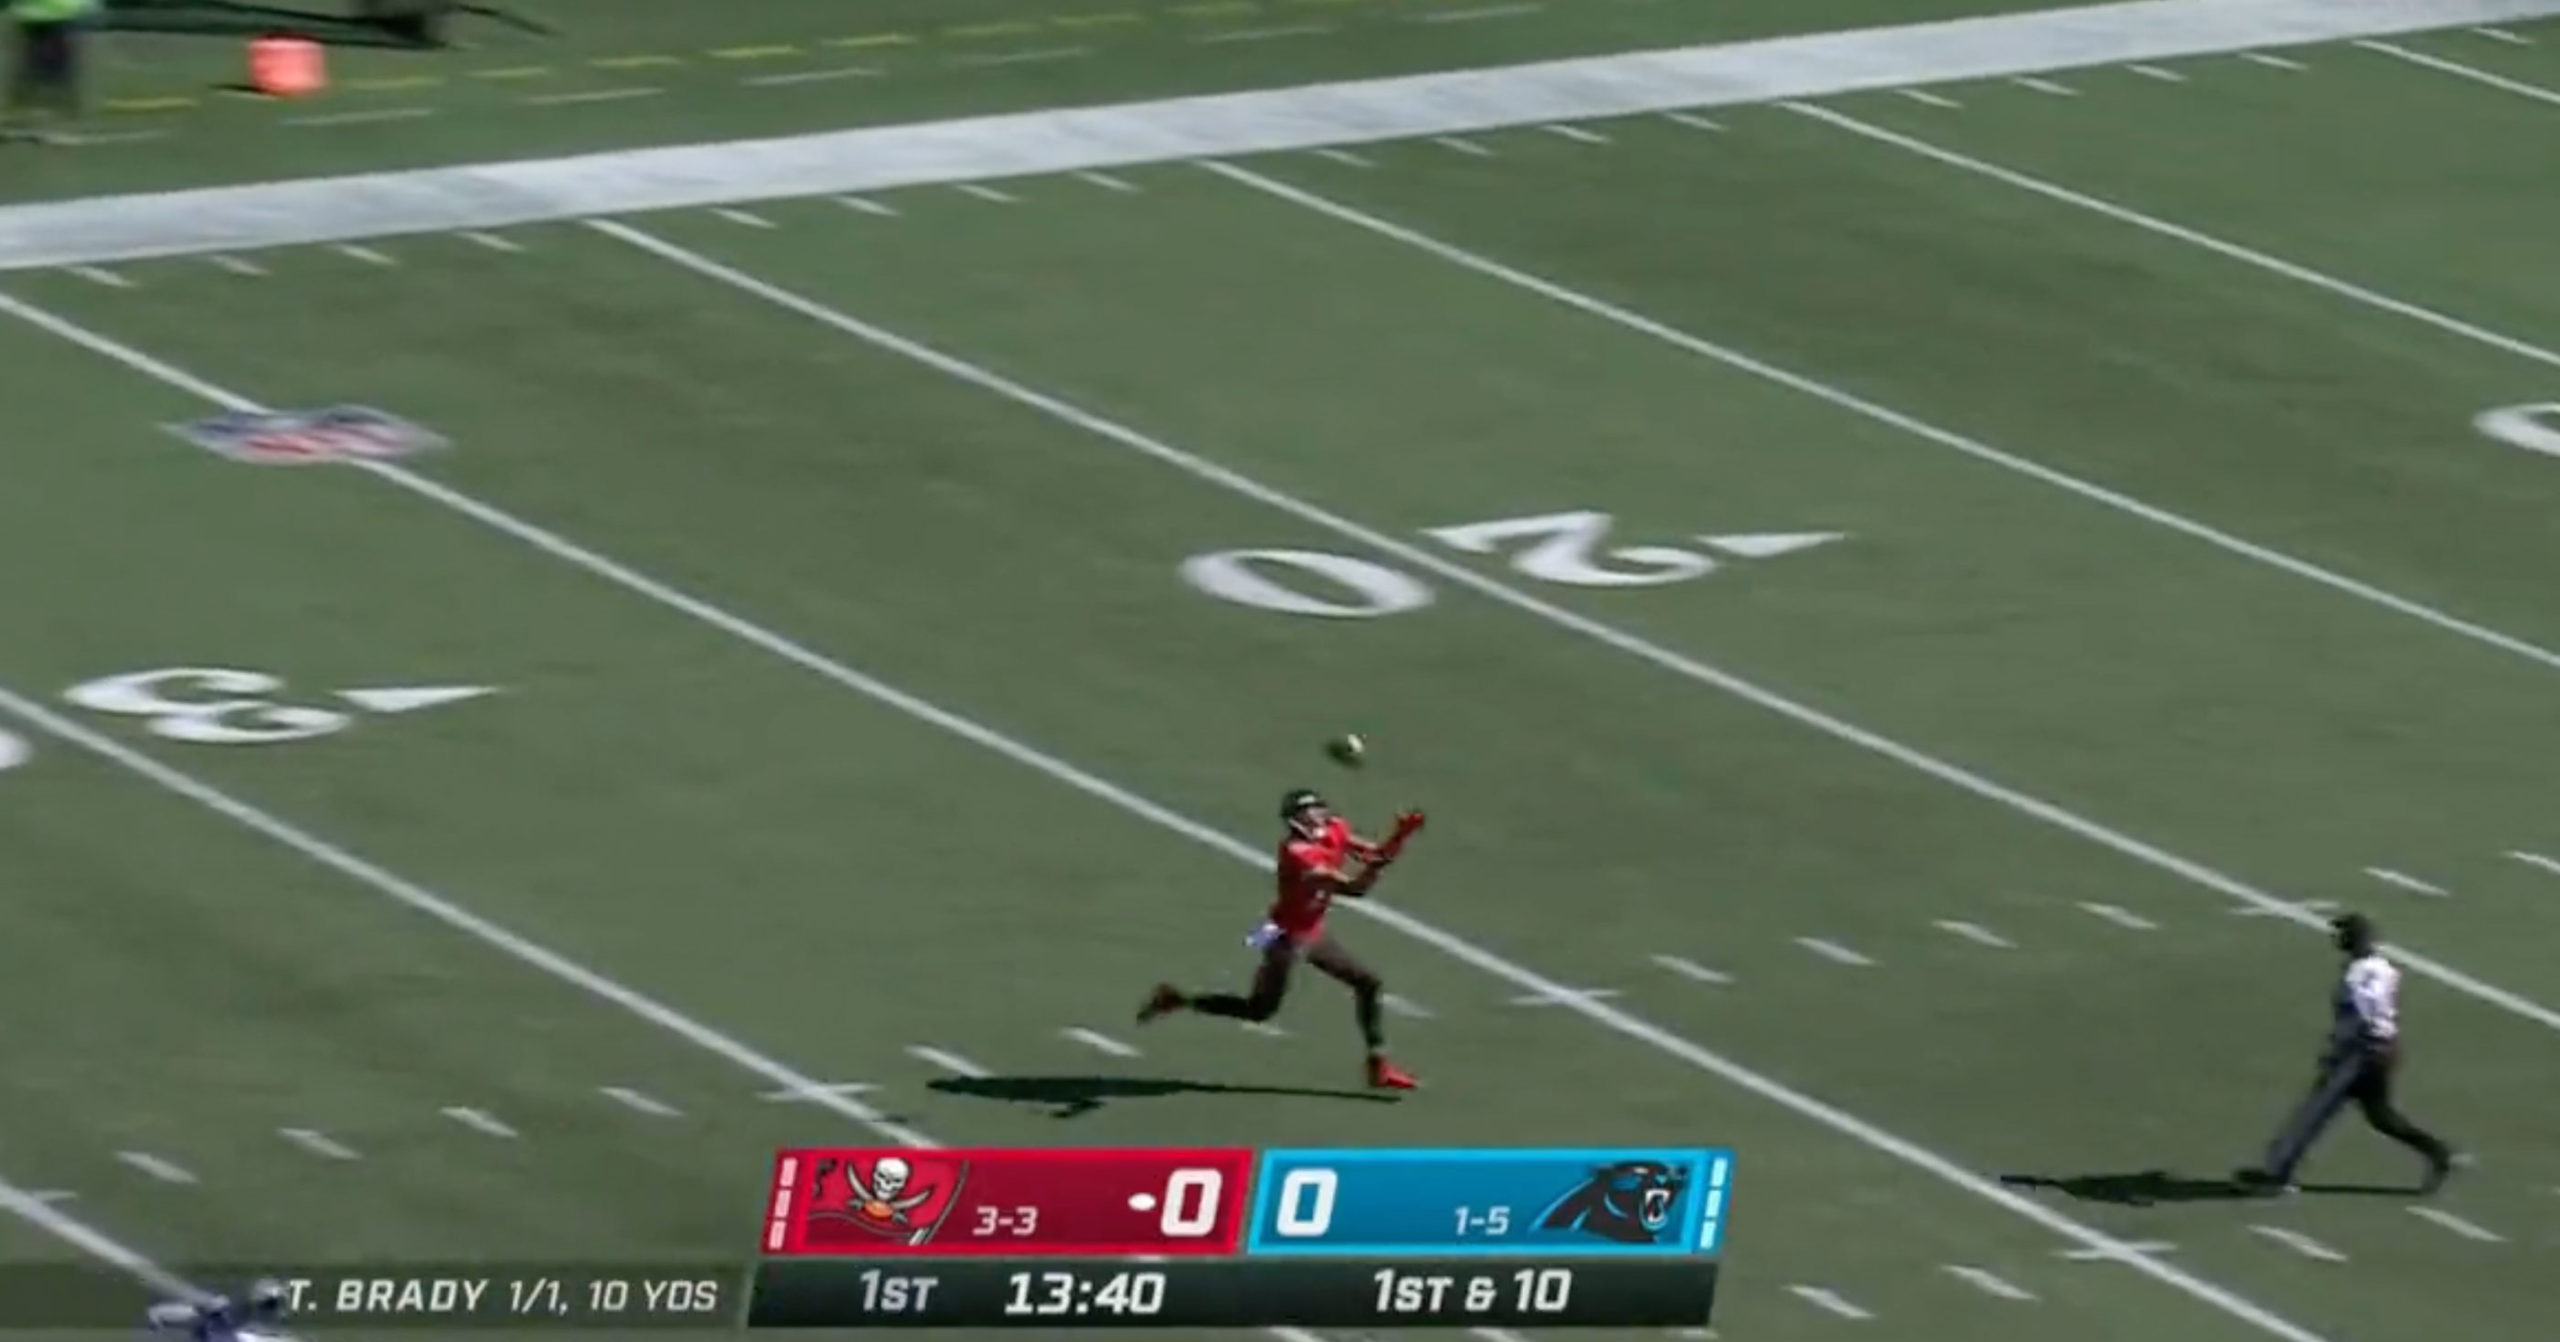 Bucs WR Mike Evans Drops The Widest Open Touchdown You'll See This